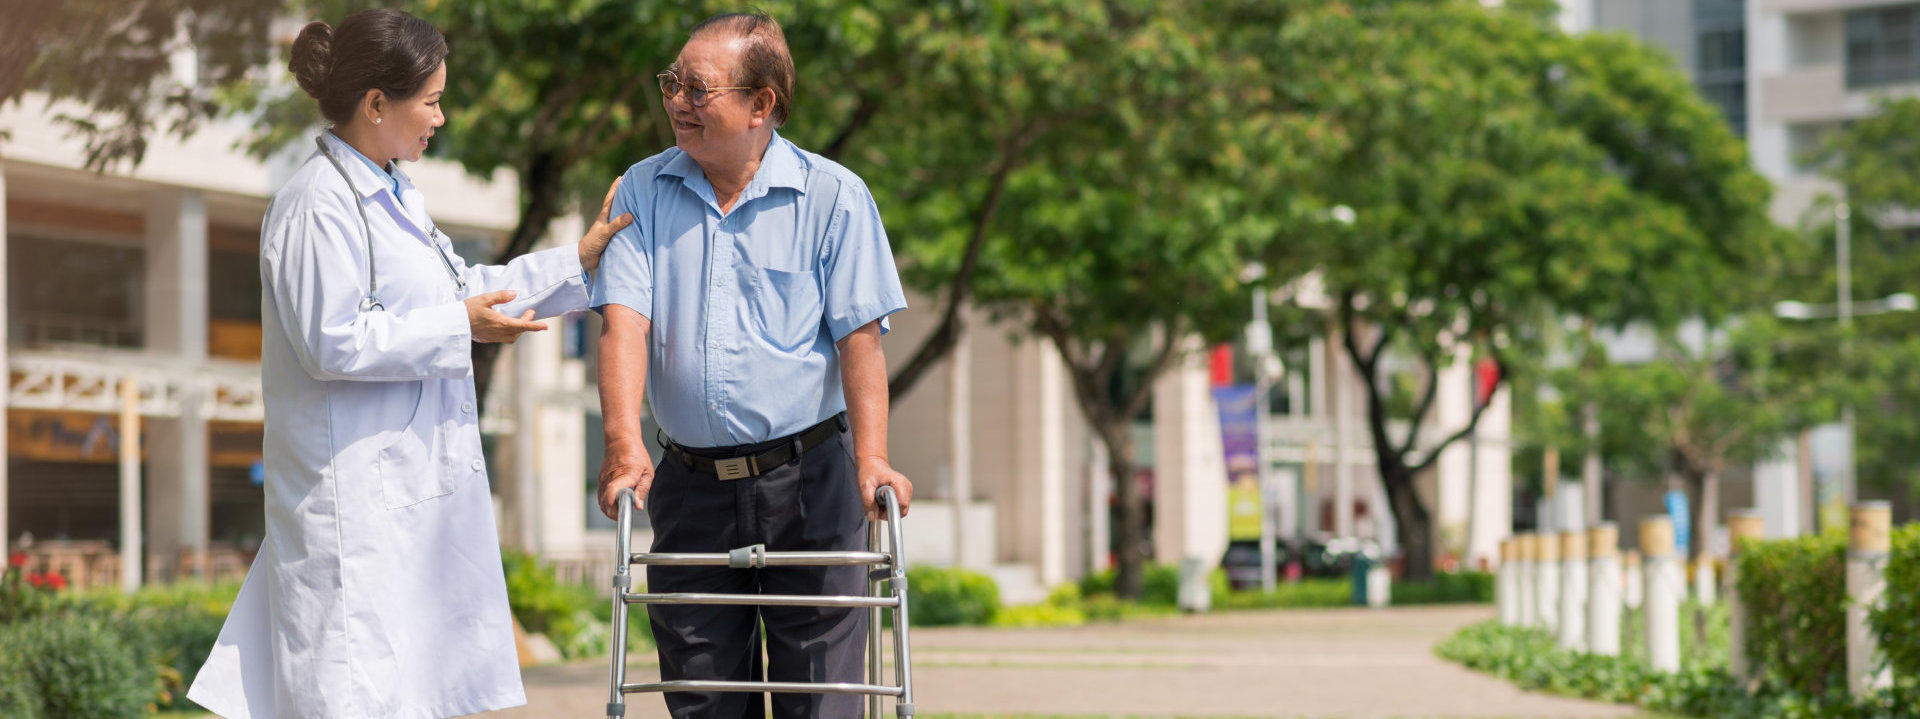 Senior man moving with walker with help of doctor